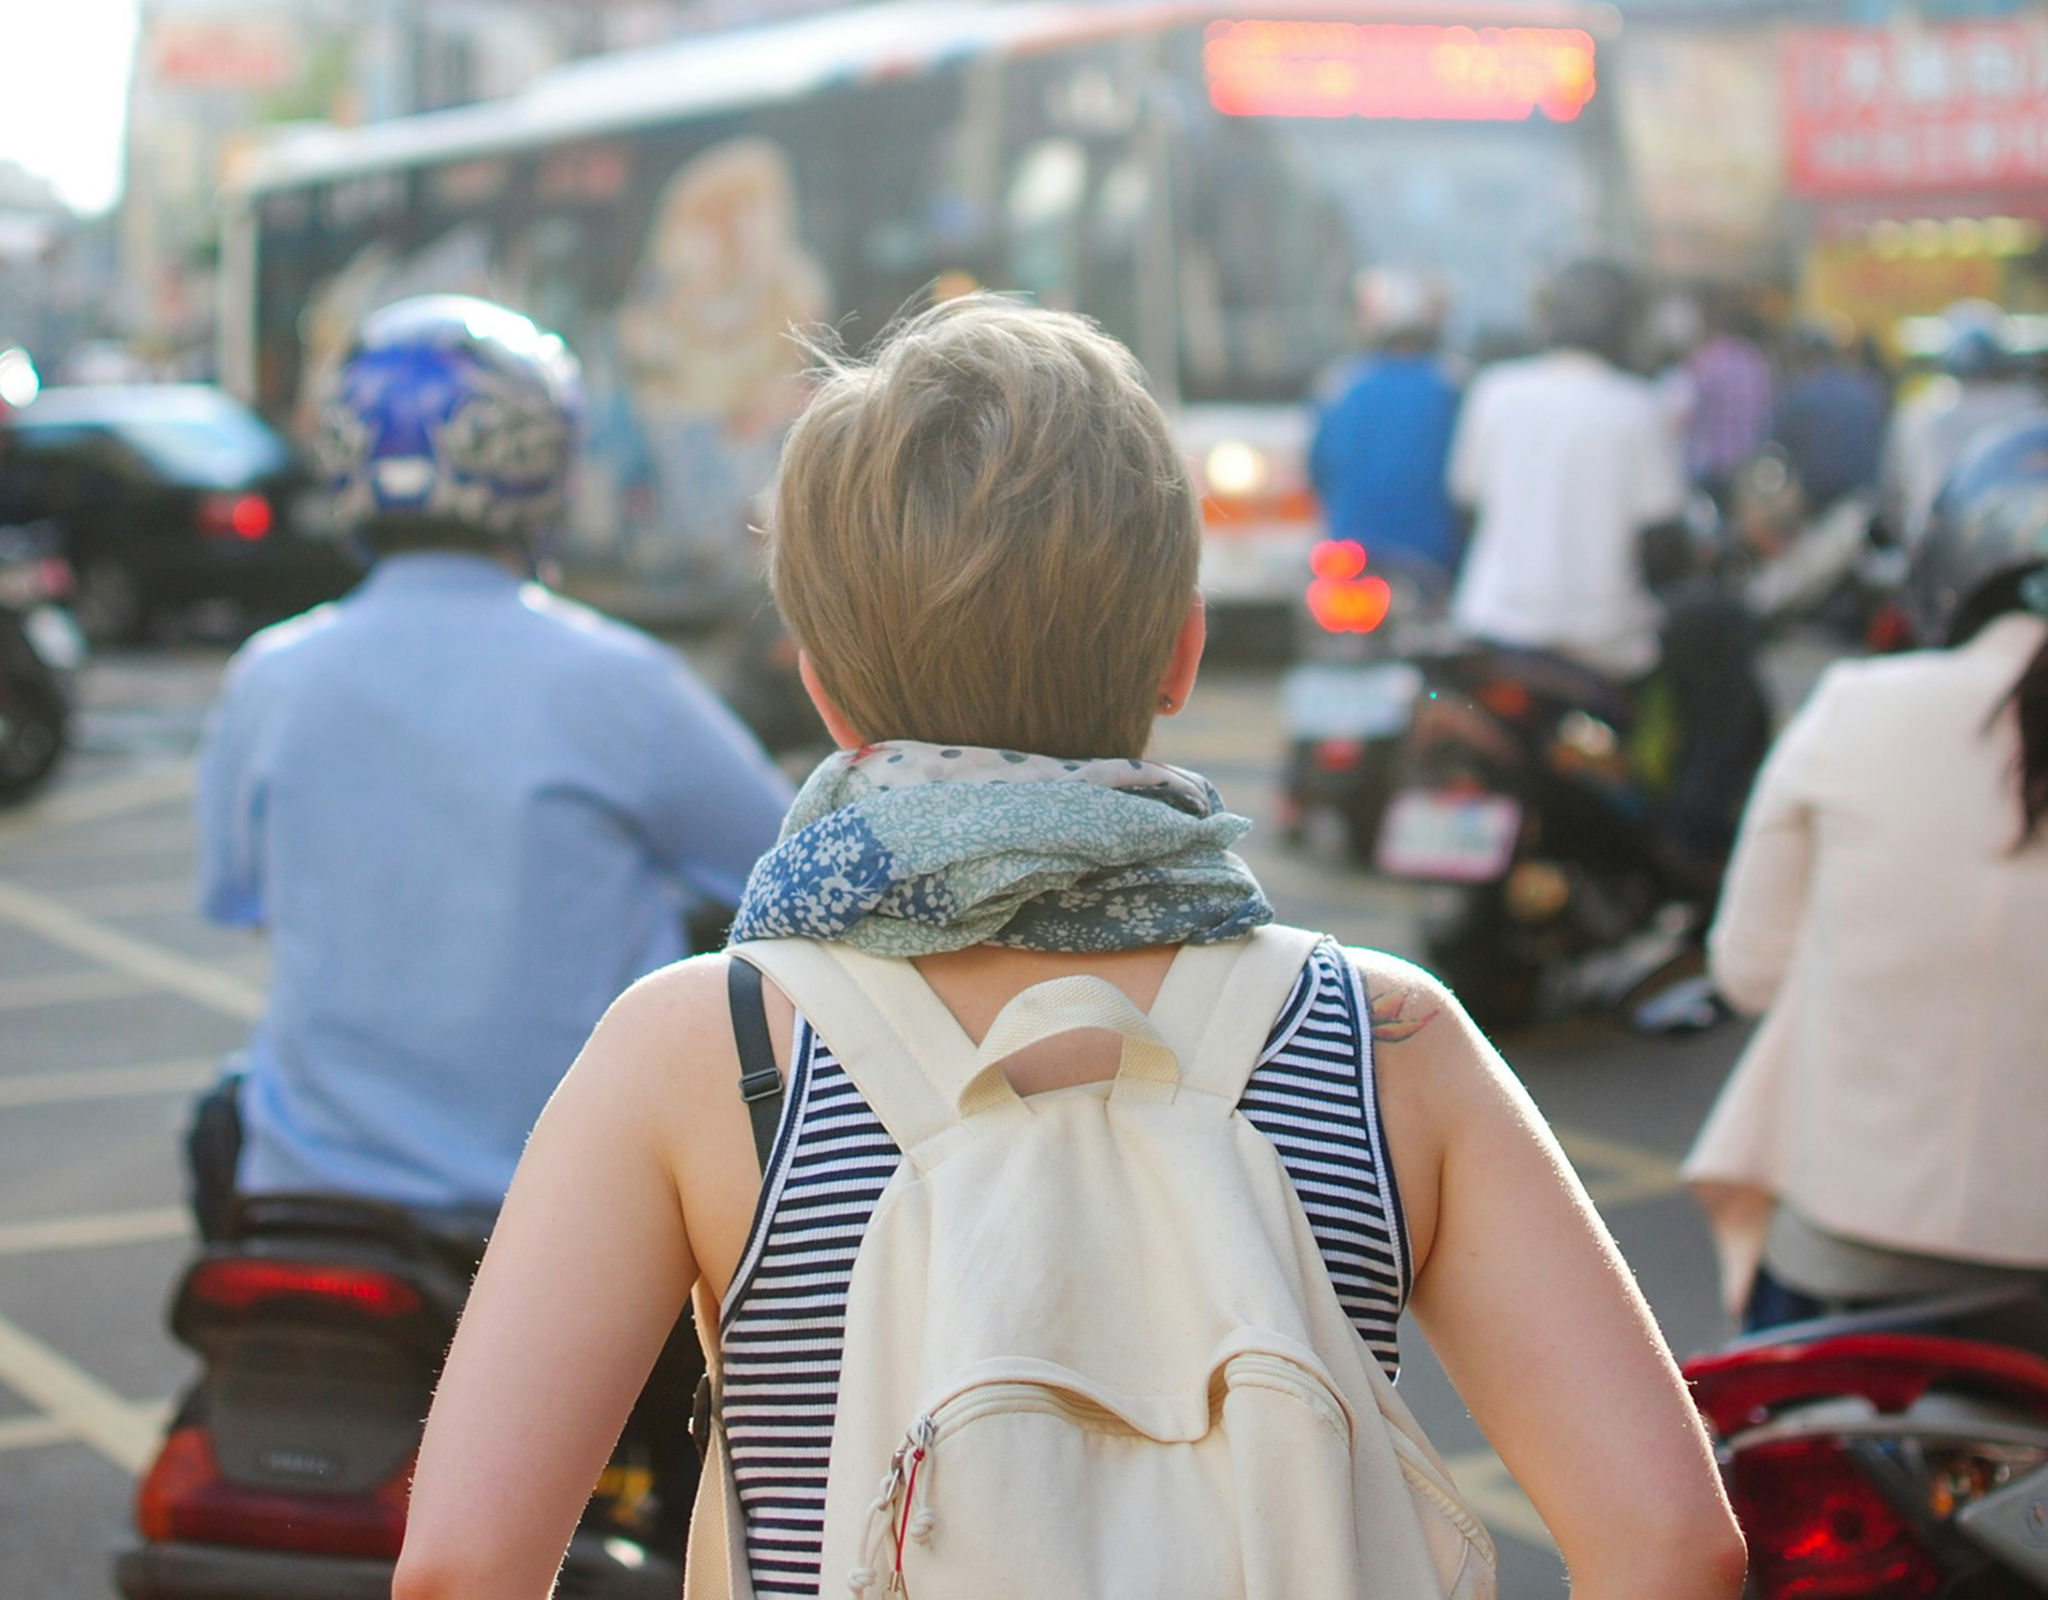 From behind: We see a woman with short dirty blonde hair walking through a crowded street. She is wearing a white backpack and there is a person on a motorcycle just in front of her.